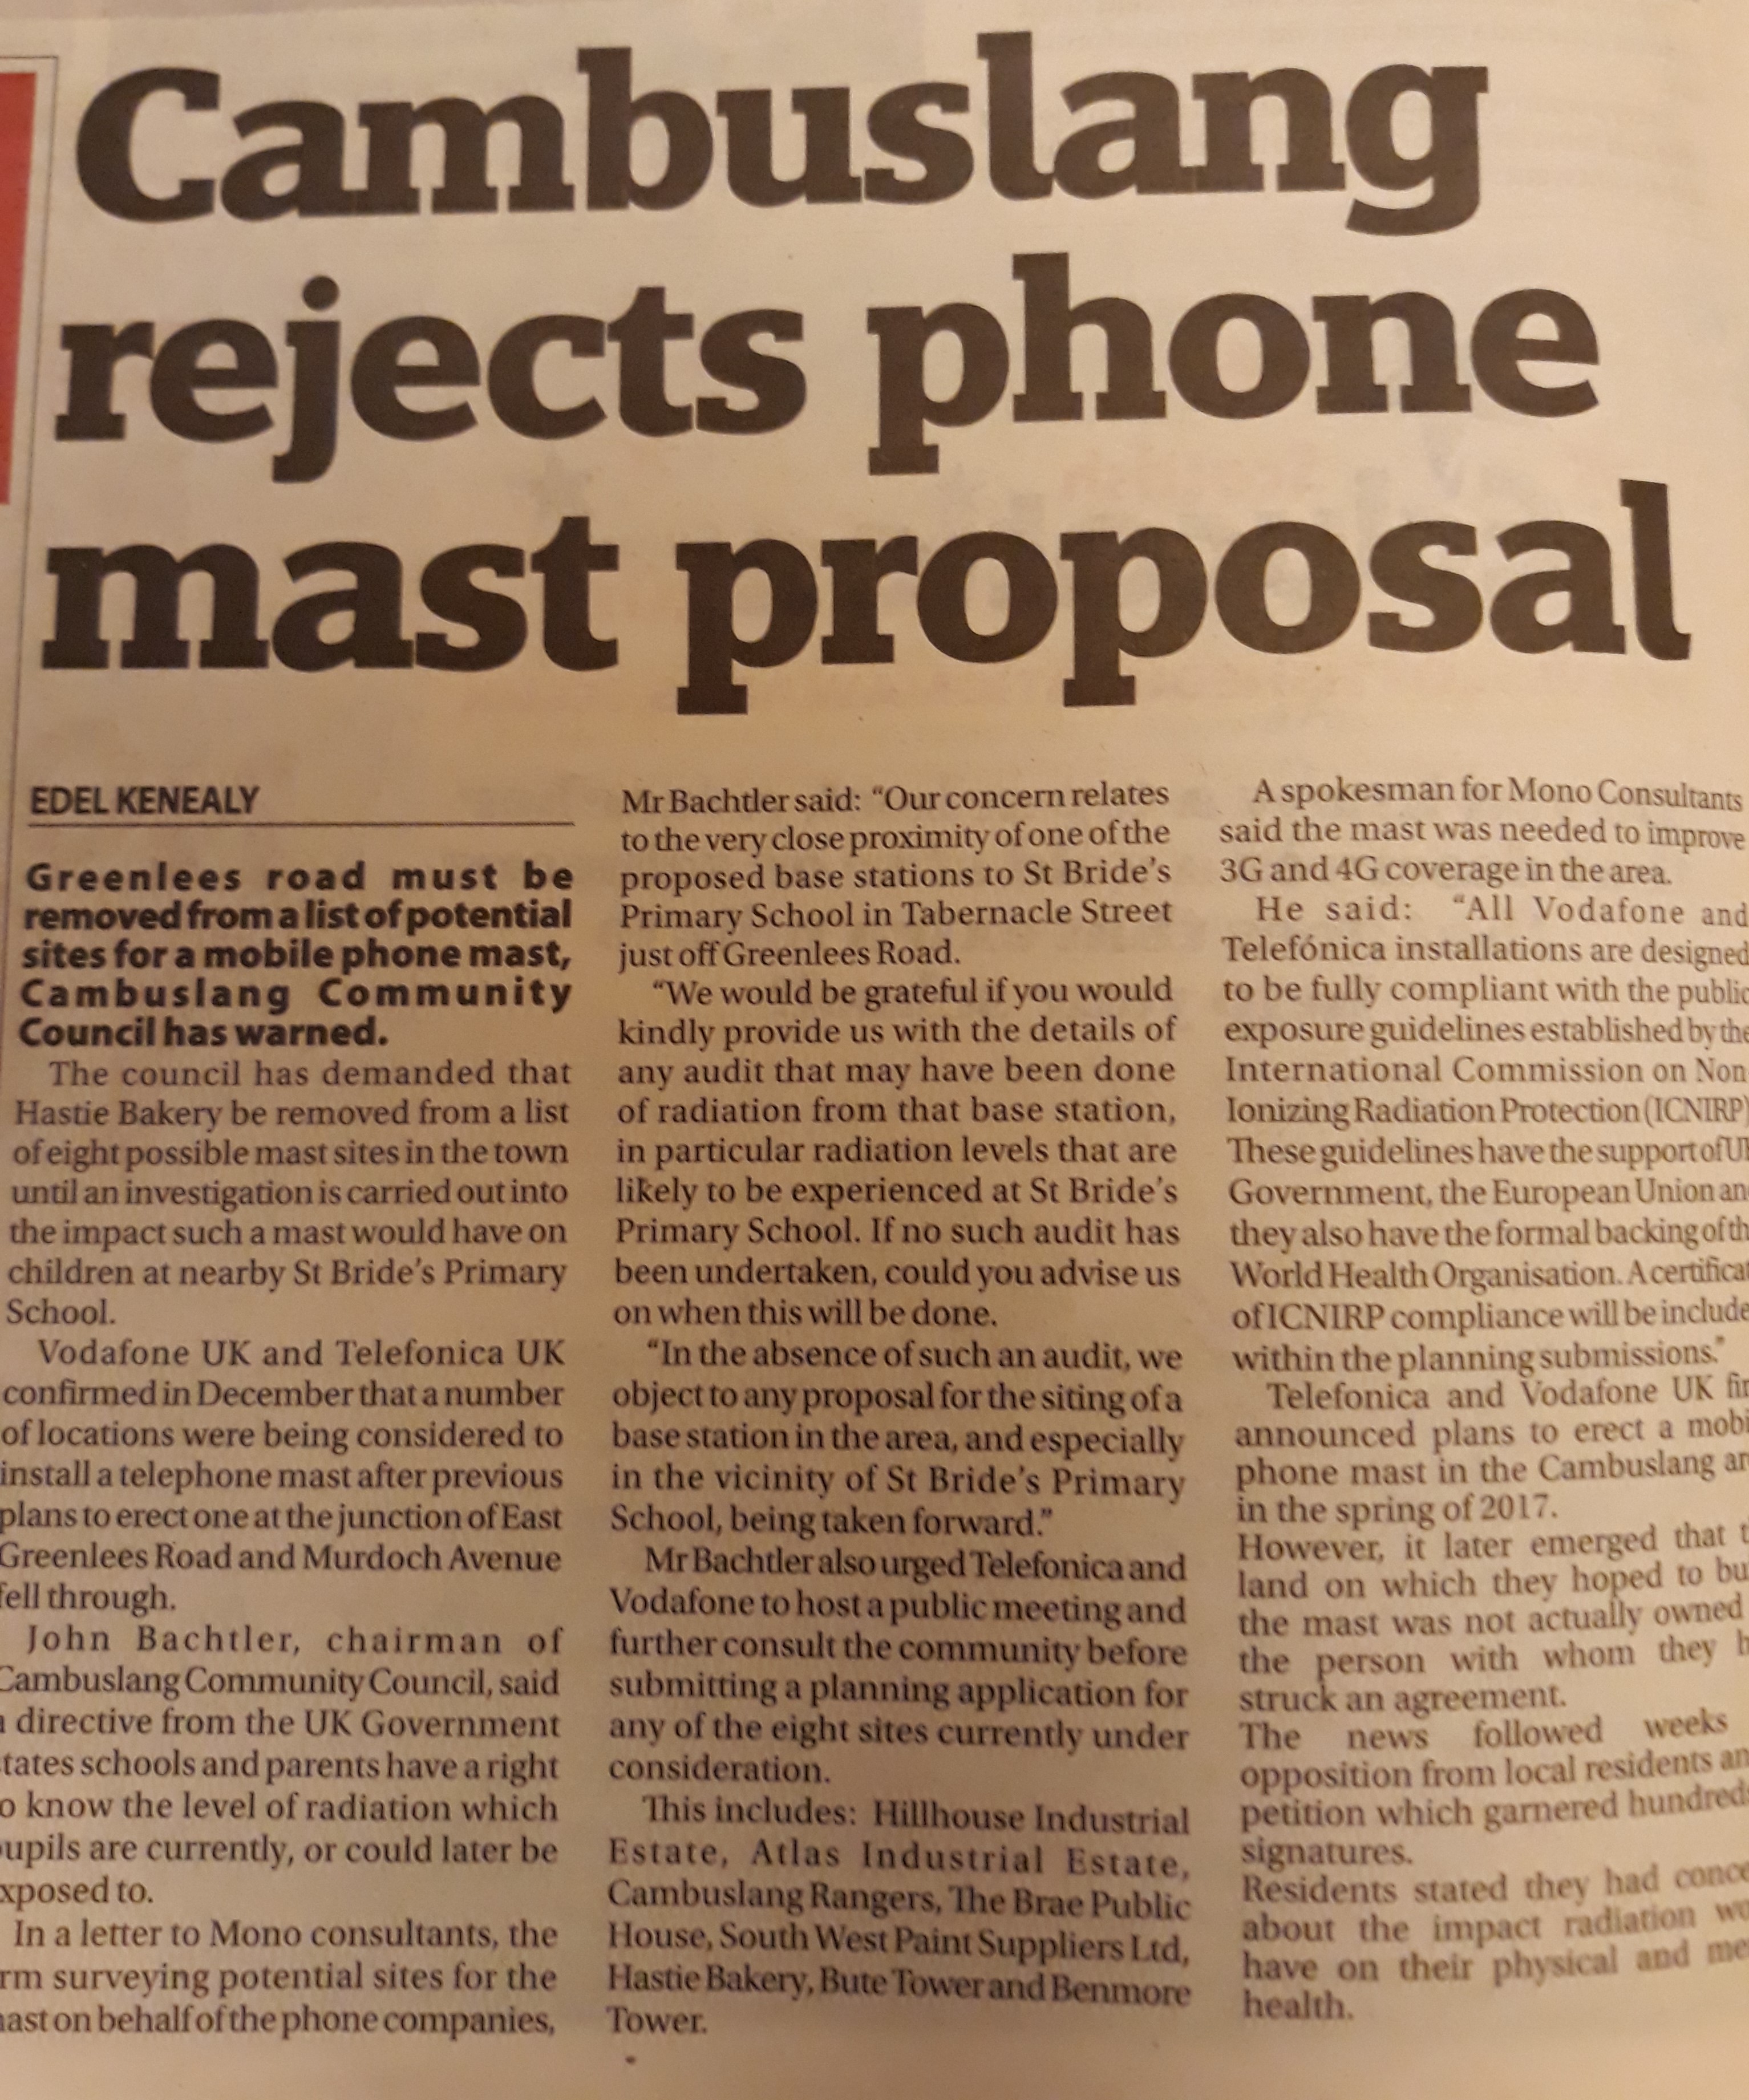 New phone masts in Cambuslang: community needs to be properly informed